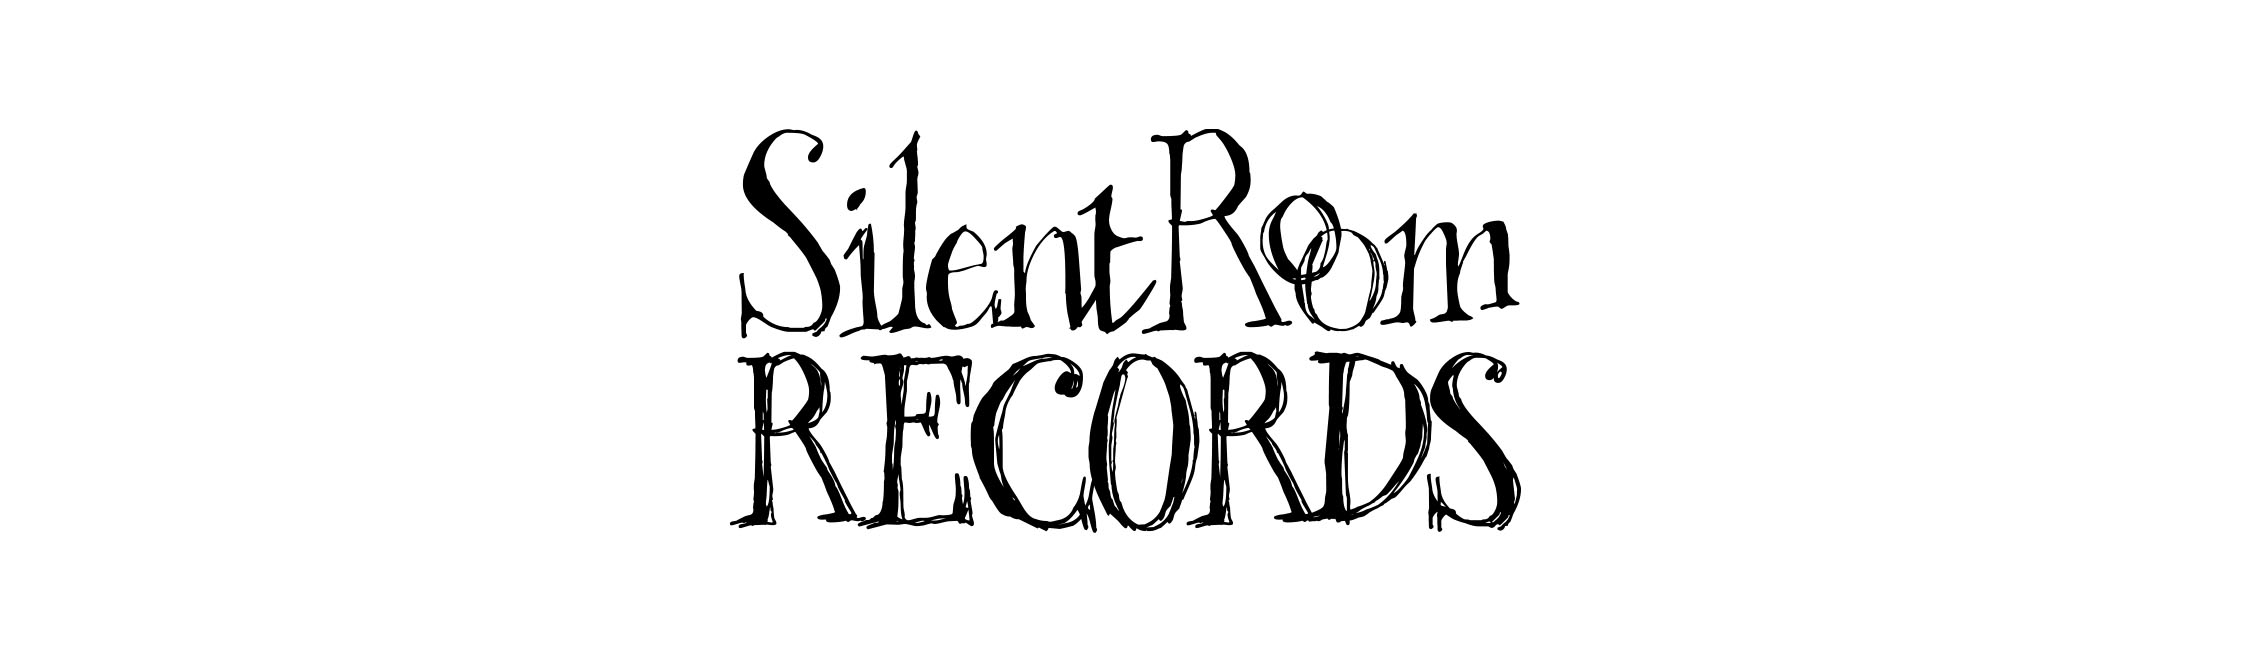 Silent Room Records